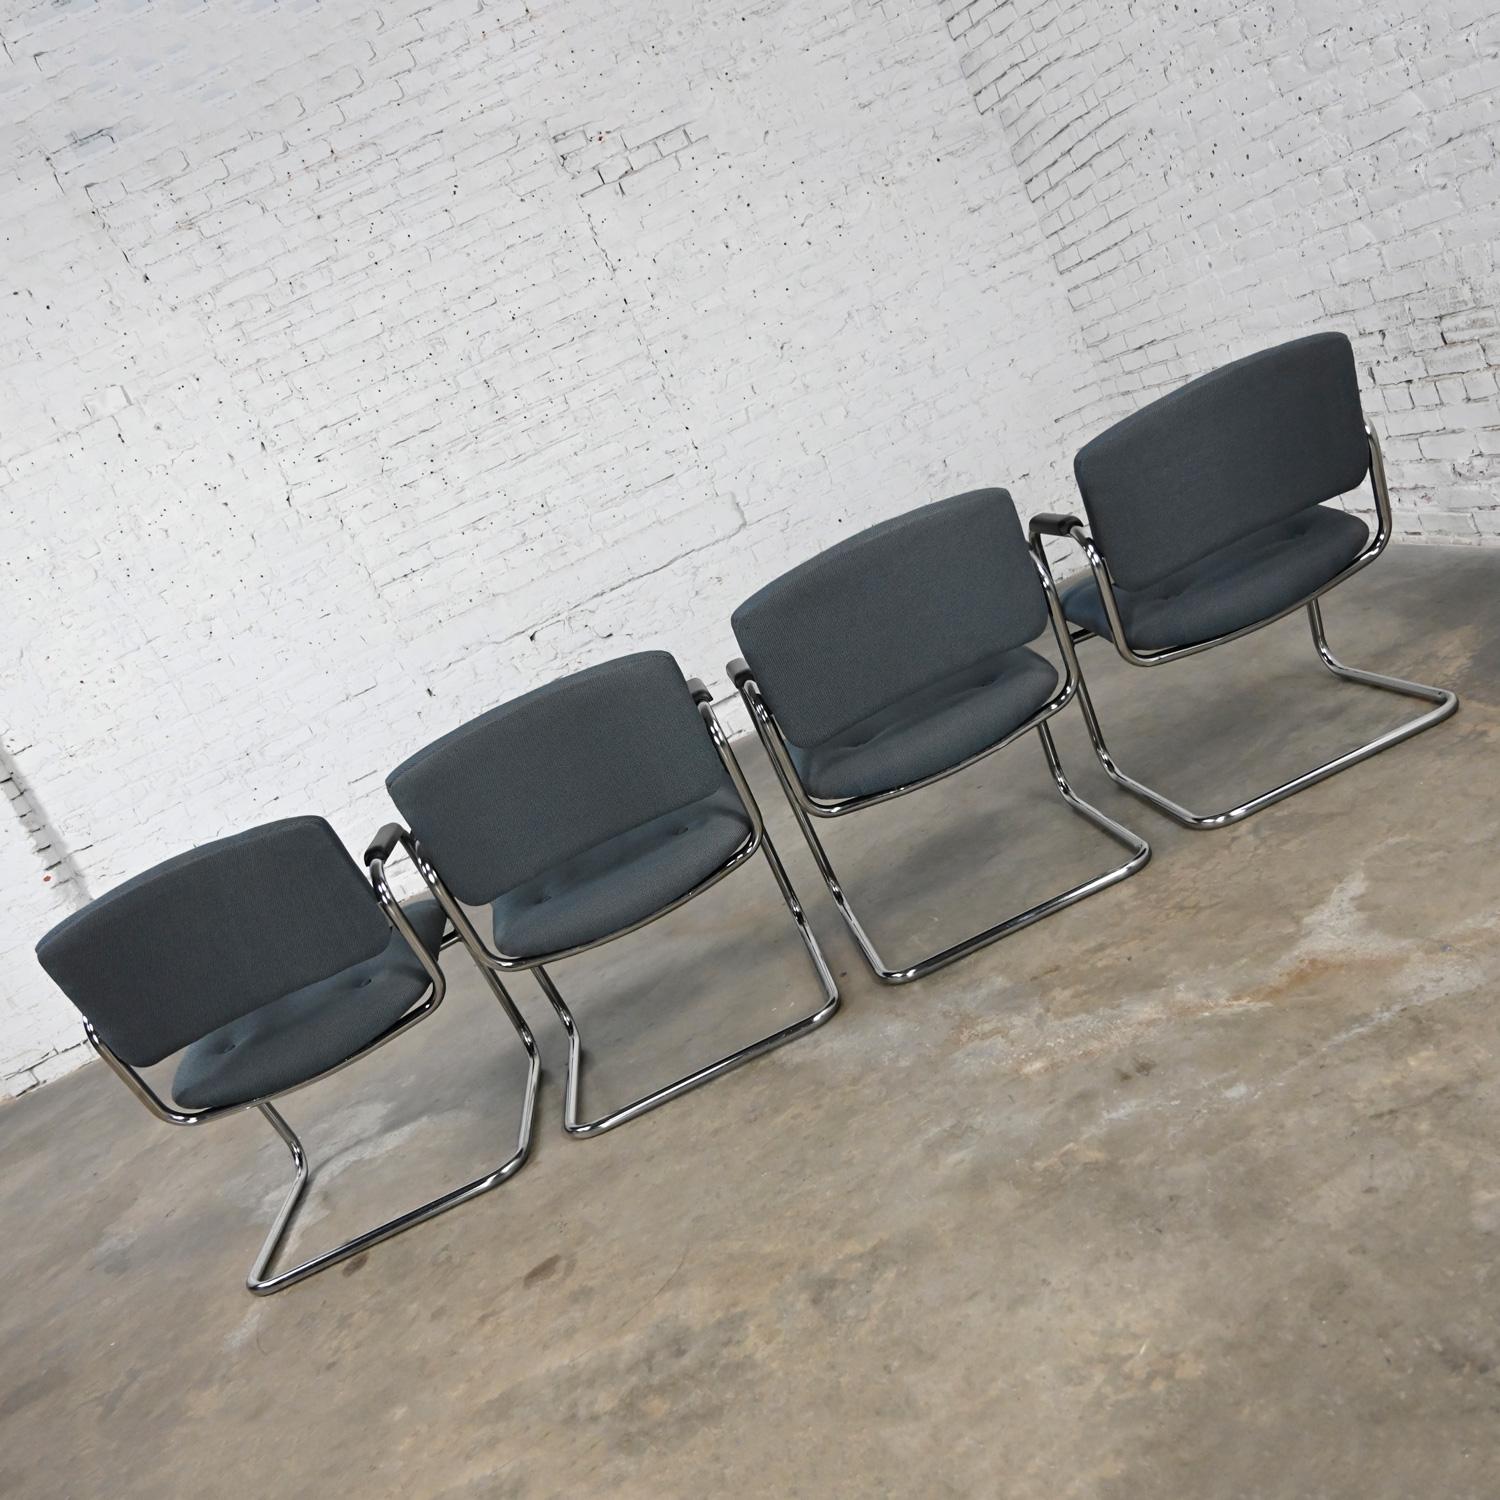 Late 20th Century Gray & Chrome Cantilever Chairs Style Steelcase Set of 4 For Sale 4